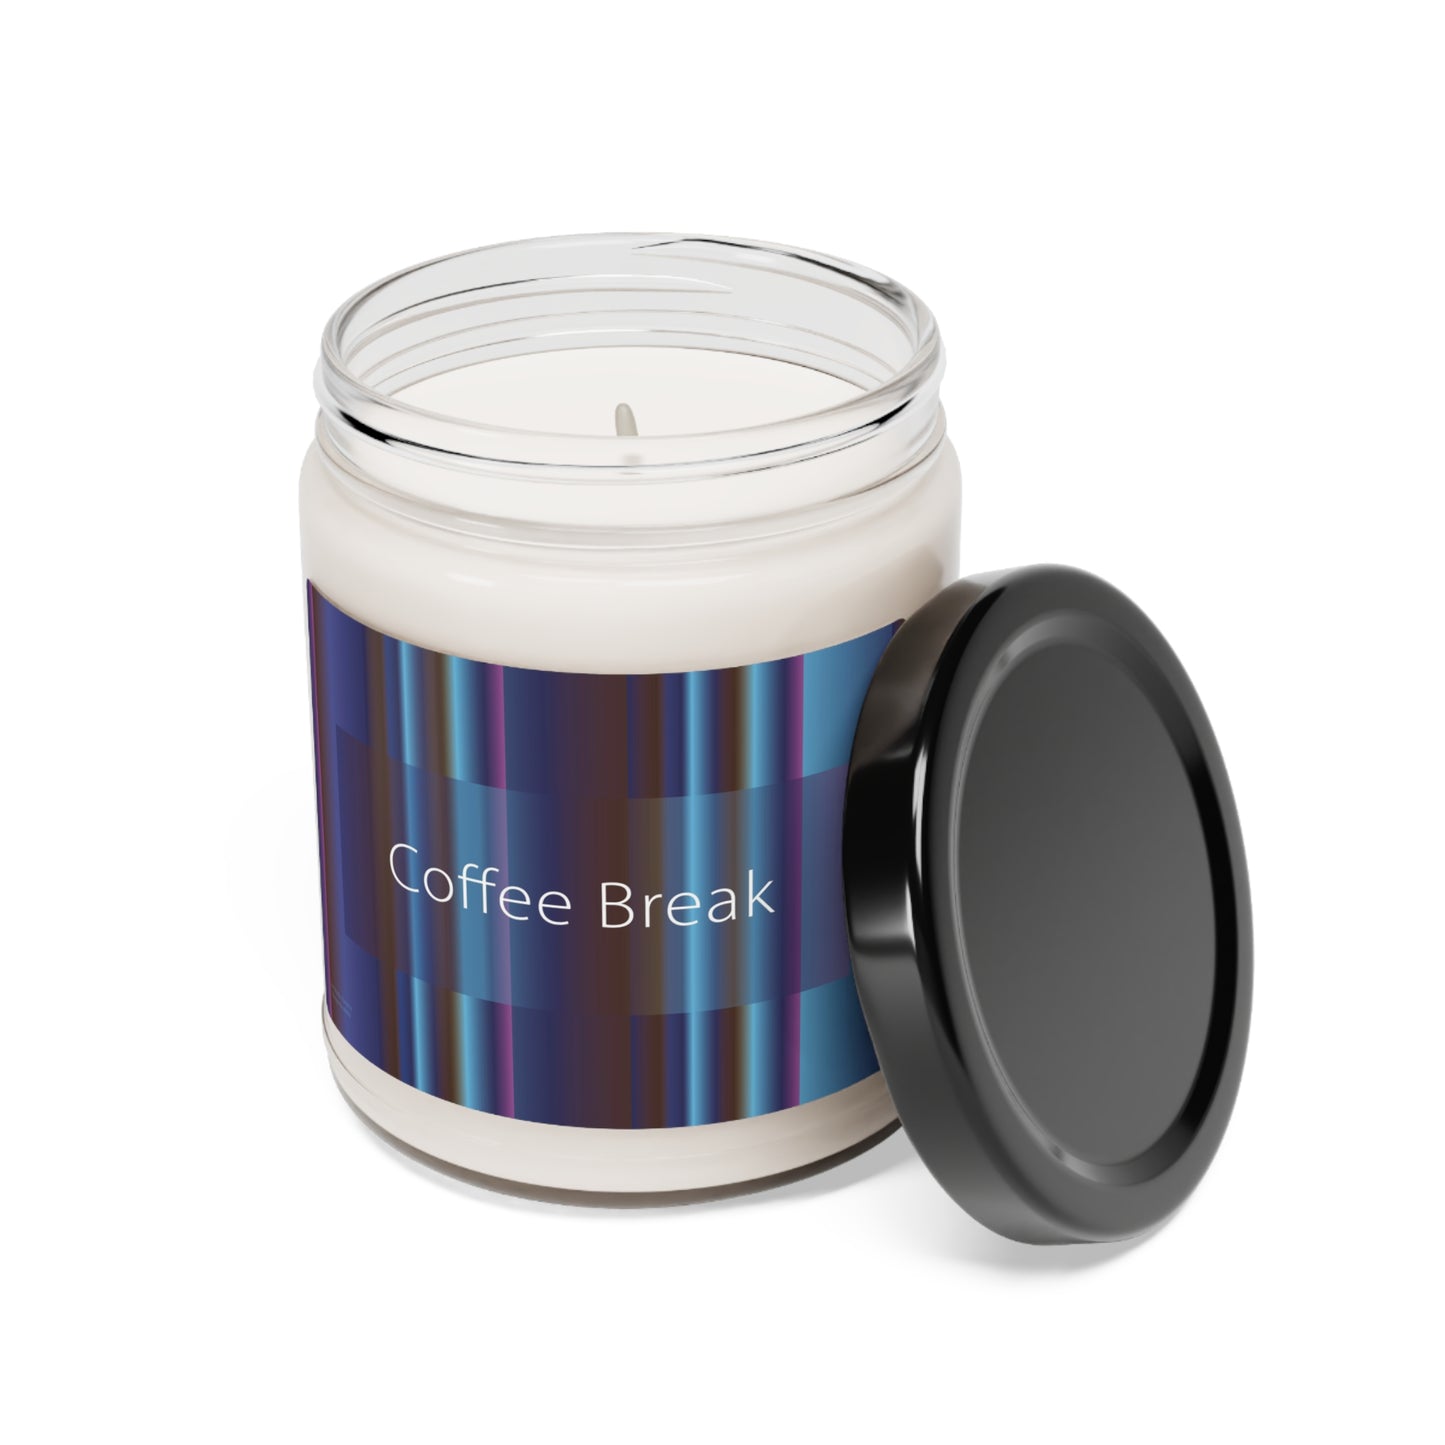 Scented Soy Candle, 9oz Coffee Break - Design No.8000